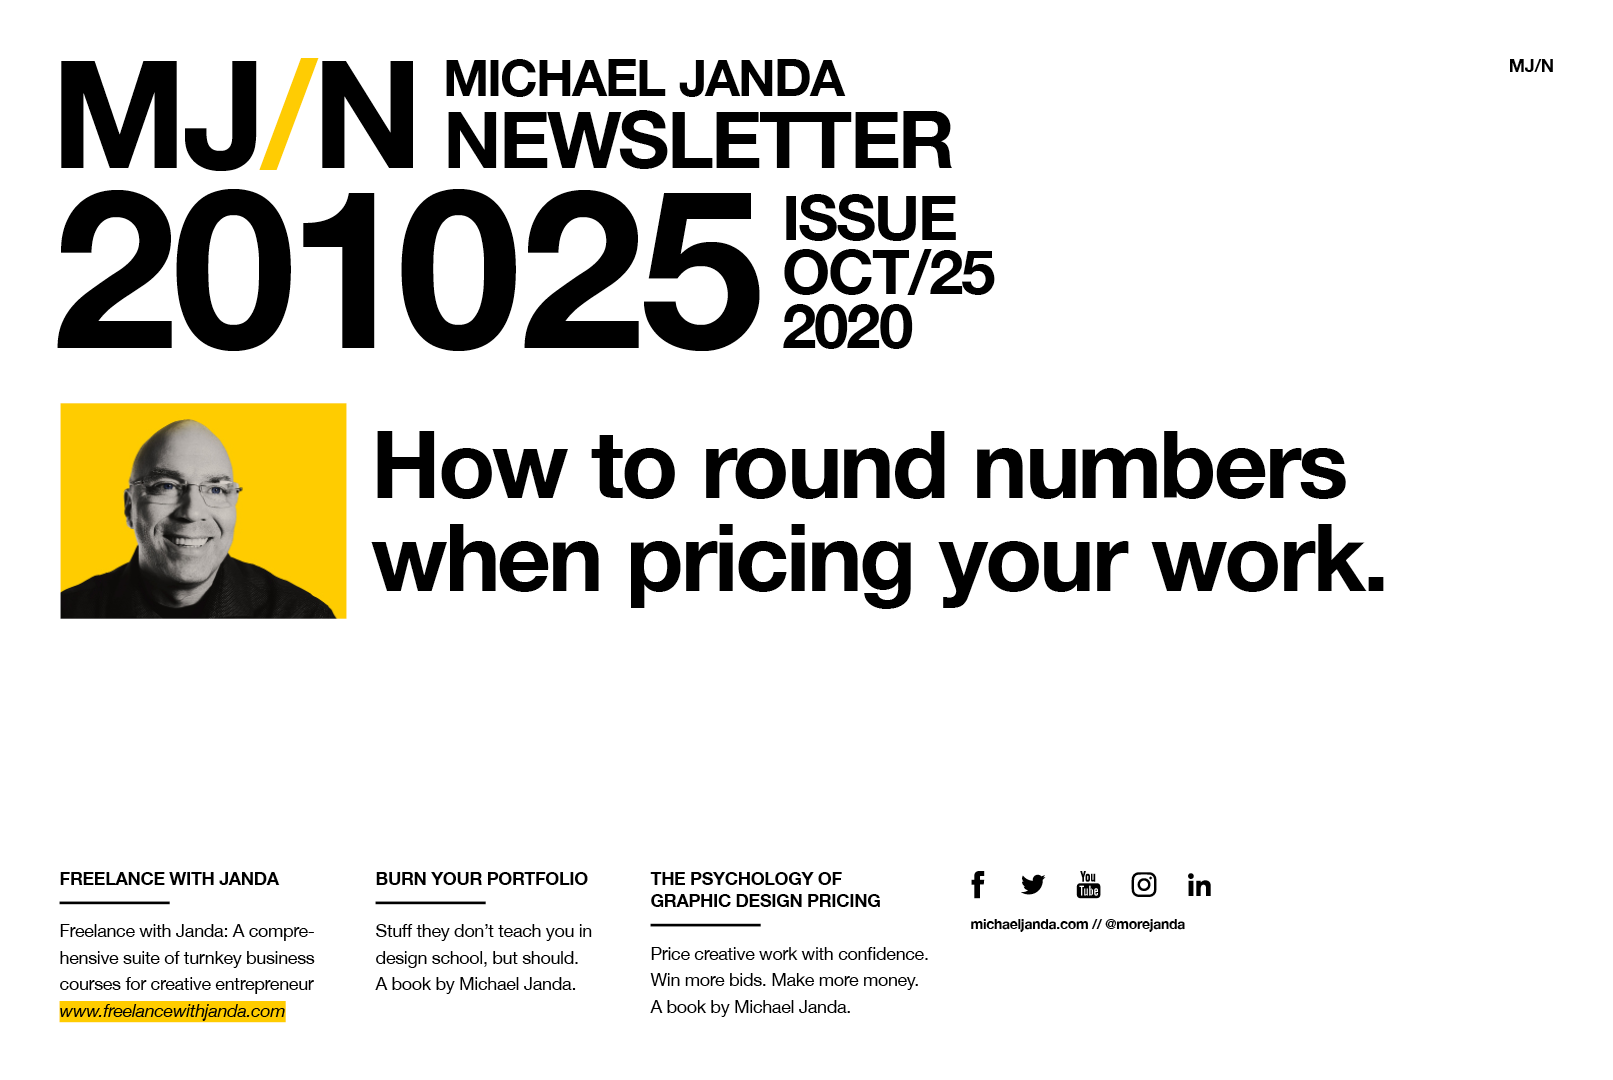 How to round numbers when pricing your work.